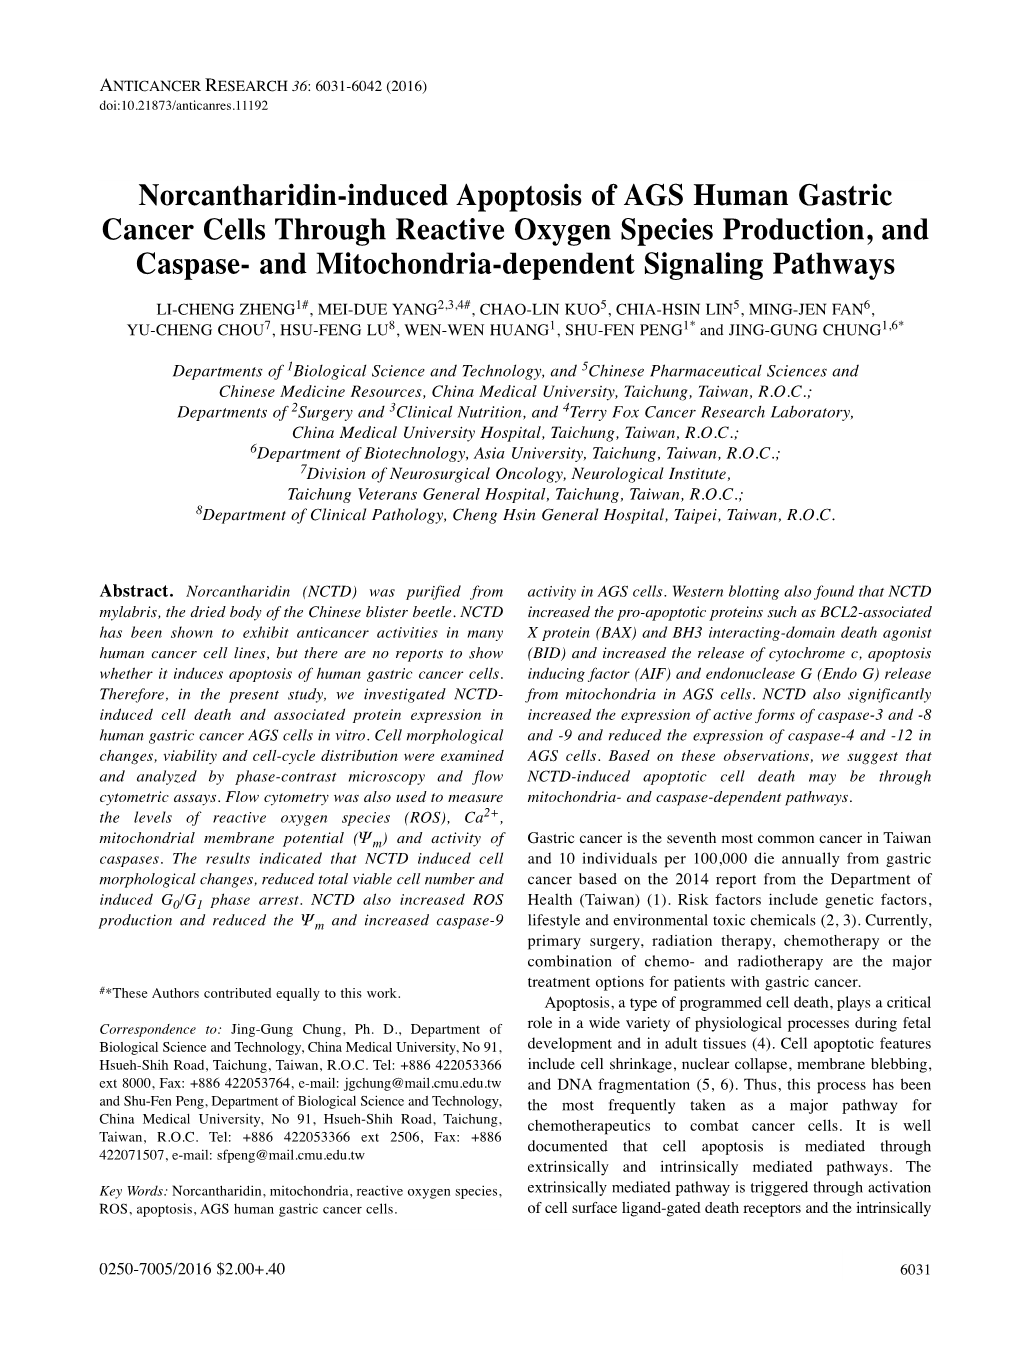 Norcantharidin-Induced Apoptosis of AGS Human Gastric Cancer Cells